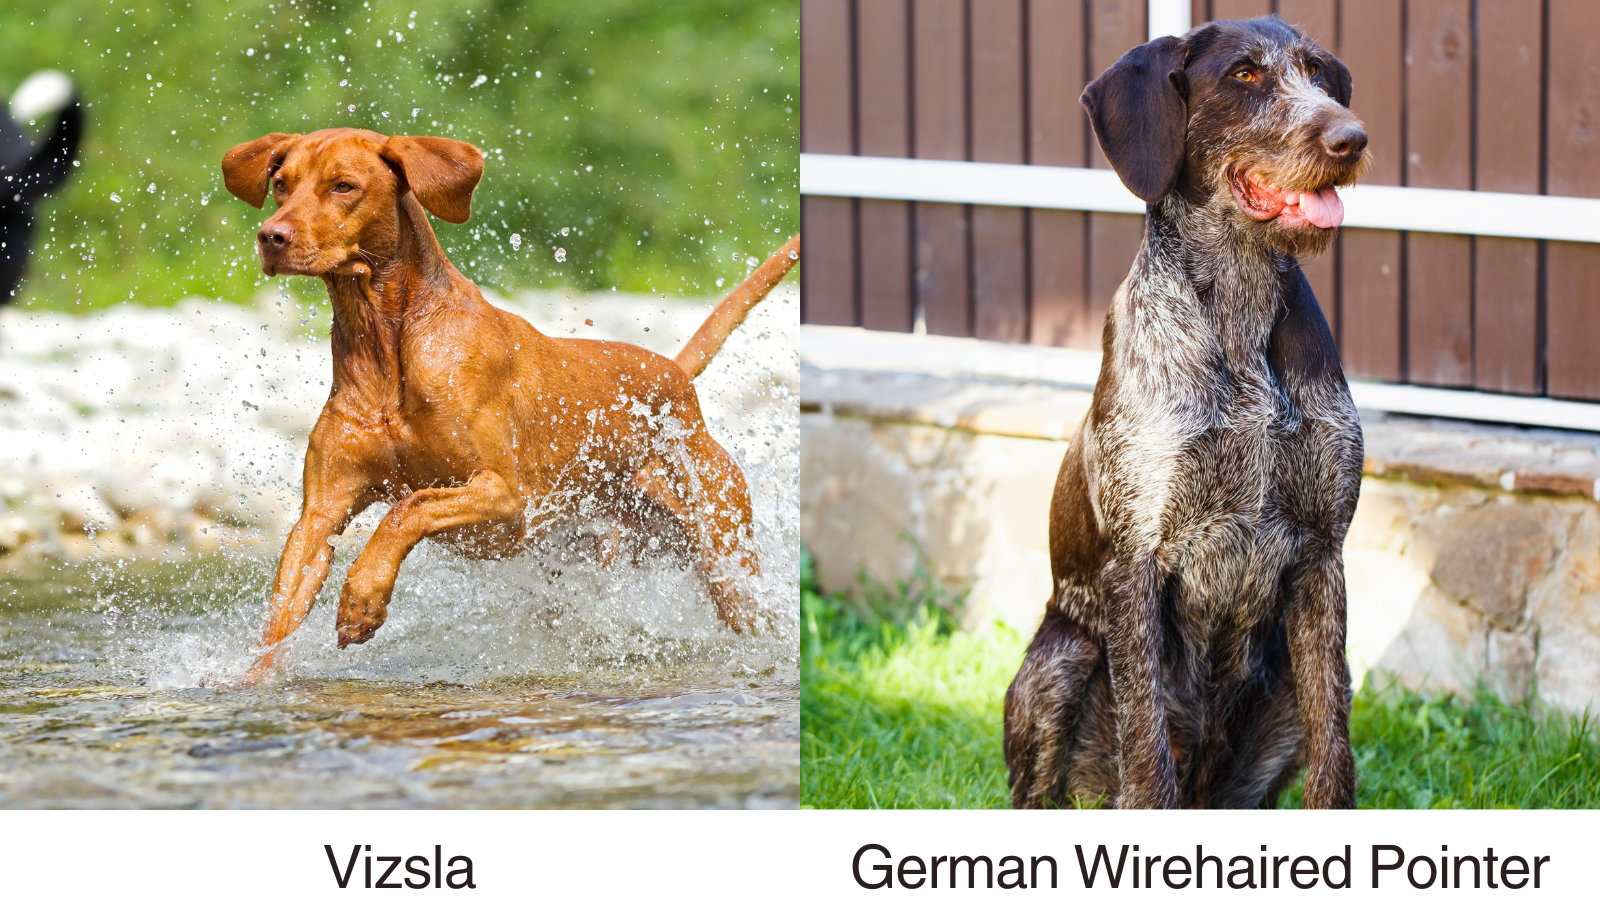 A side by side of the Vizsla and the GWP